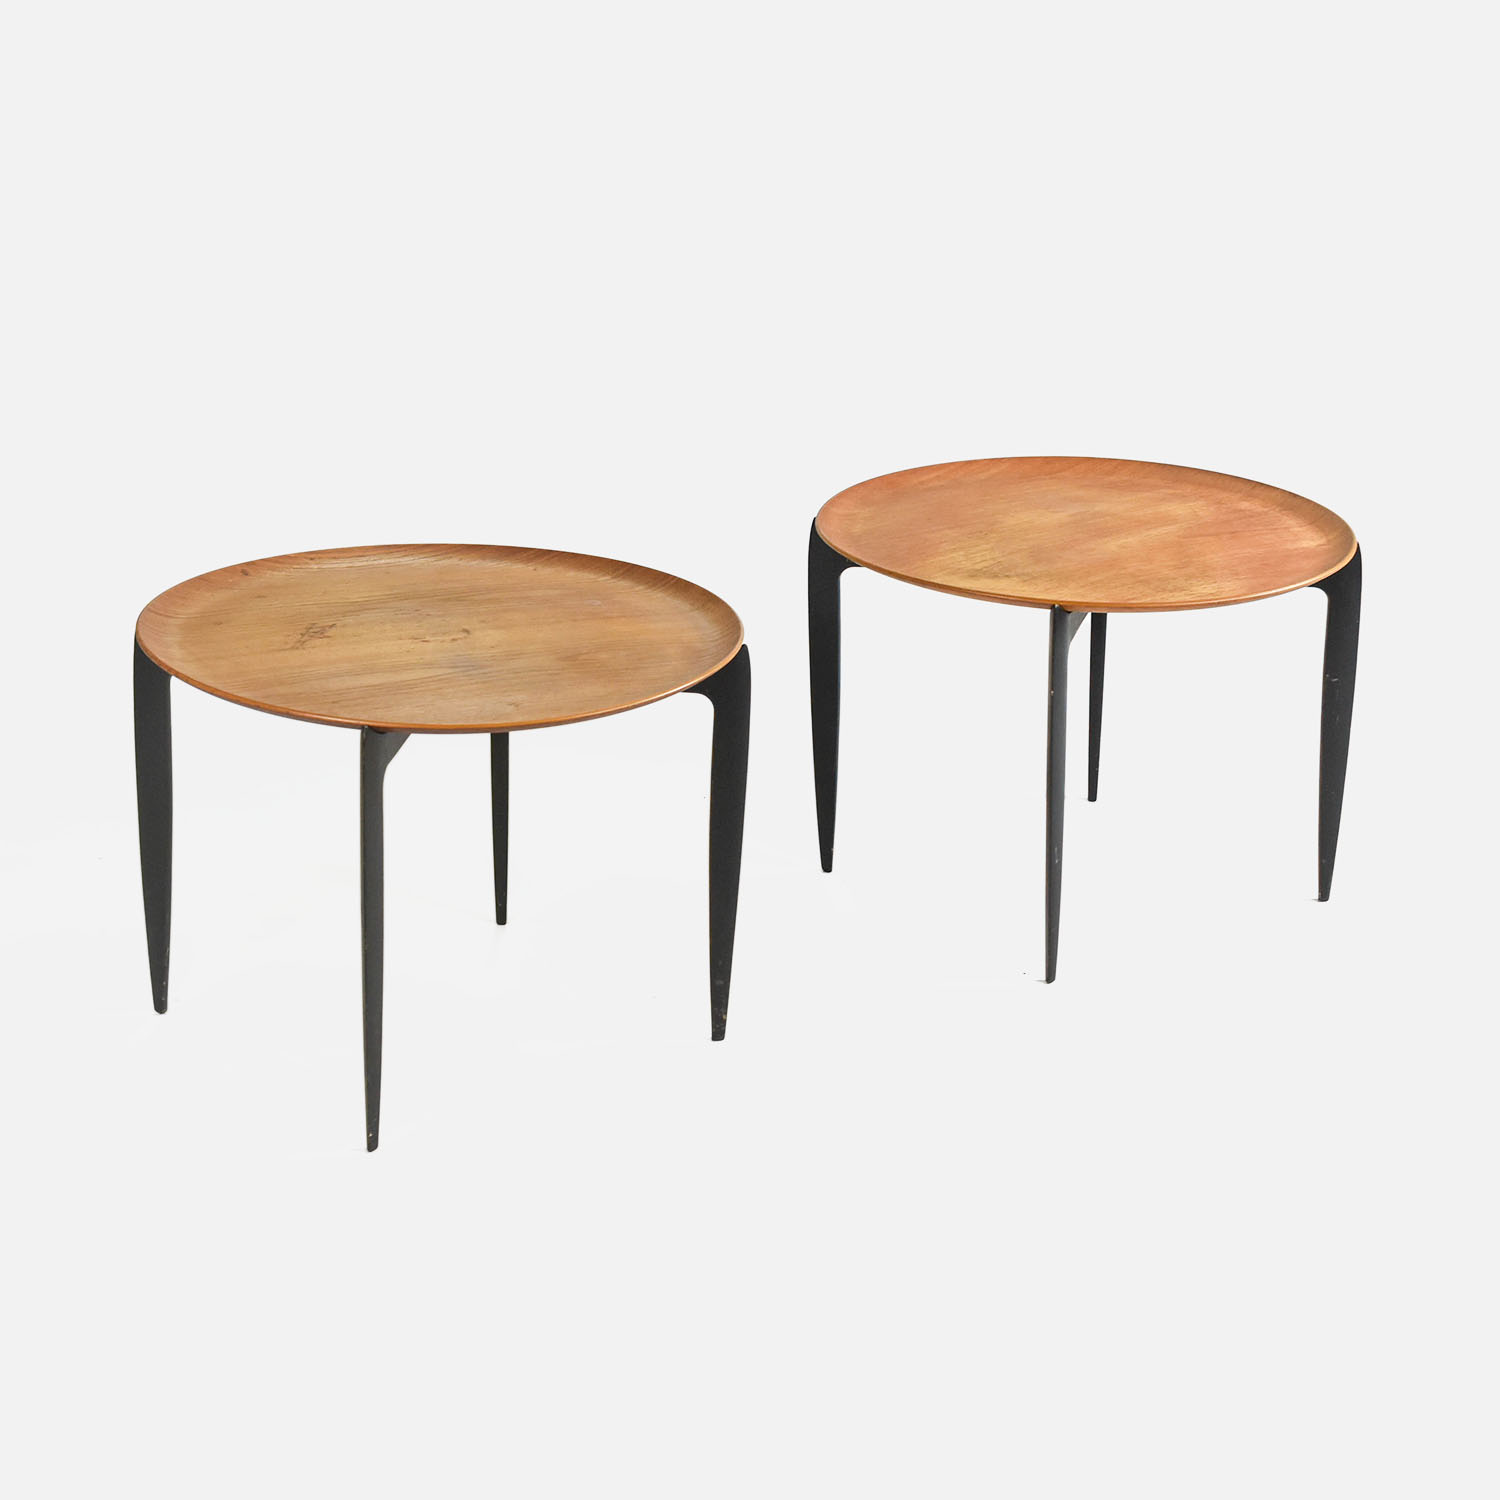 Two Willumsen & Engholm Folding Tray Tables for Fritz Hansen